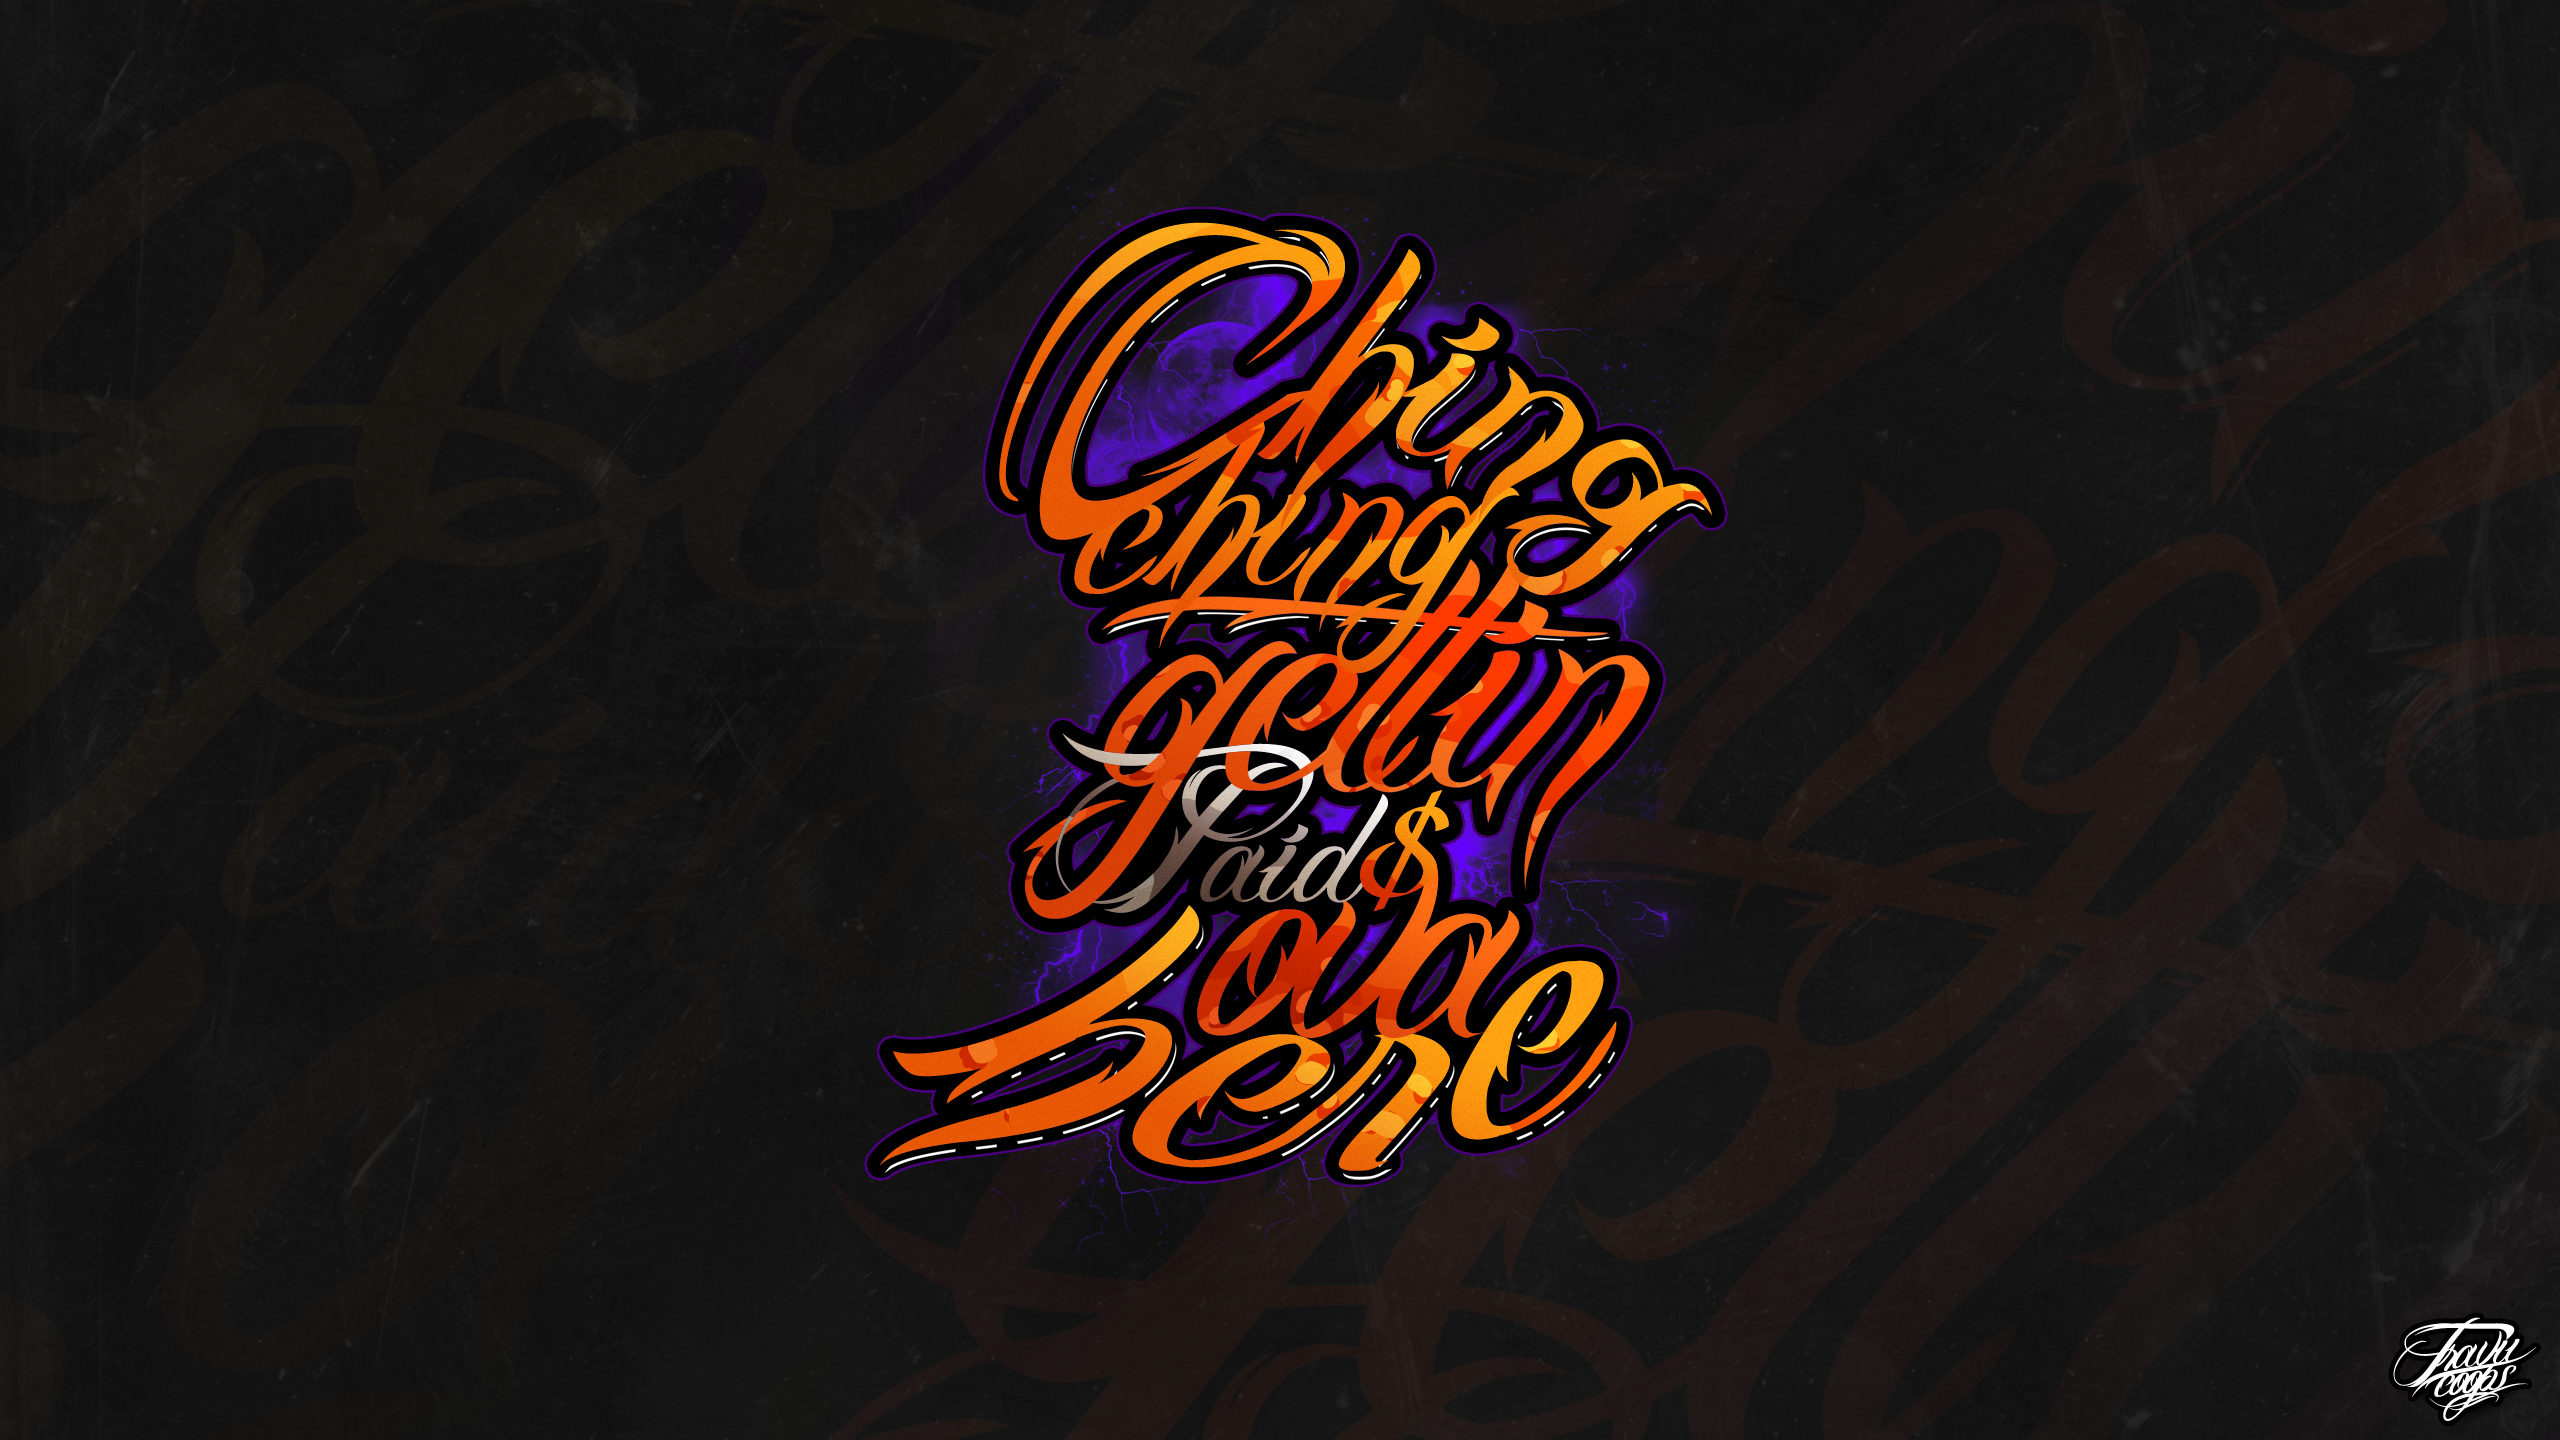 CHING CHING typography wallpaper pack by TraviiGFX on DeviantArt